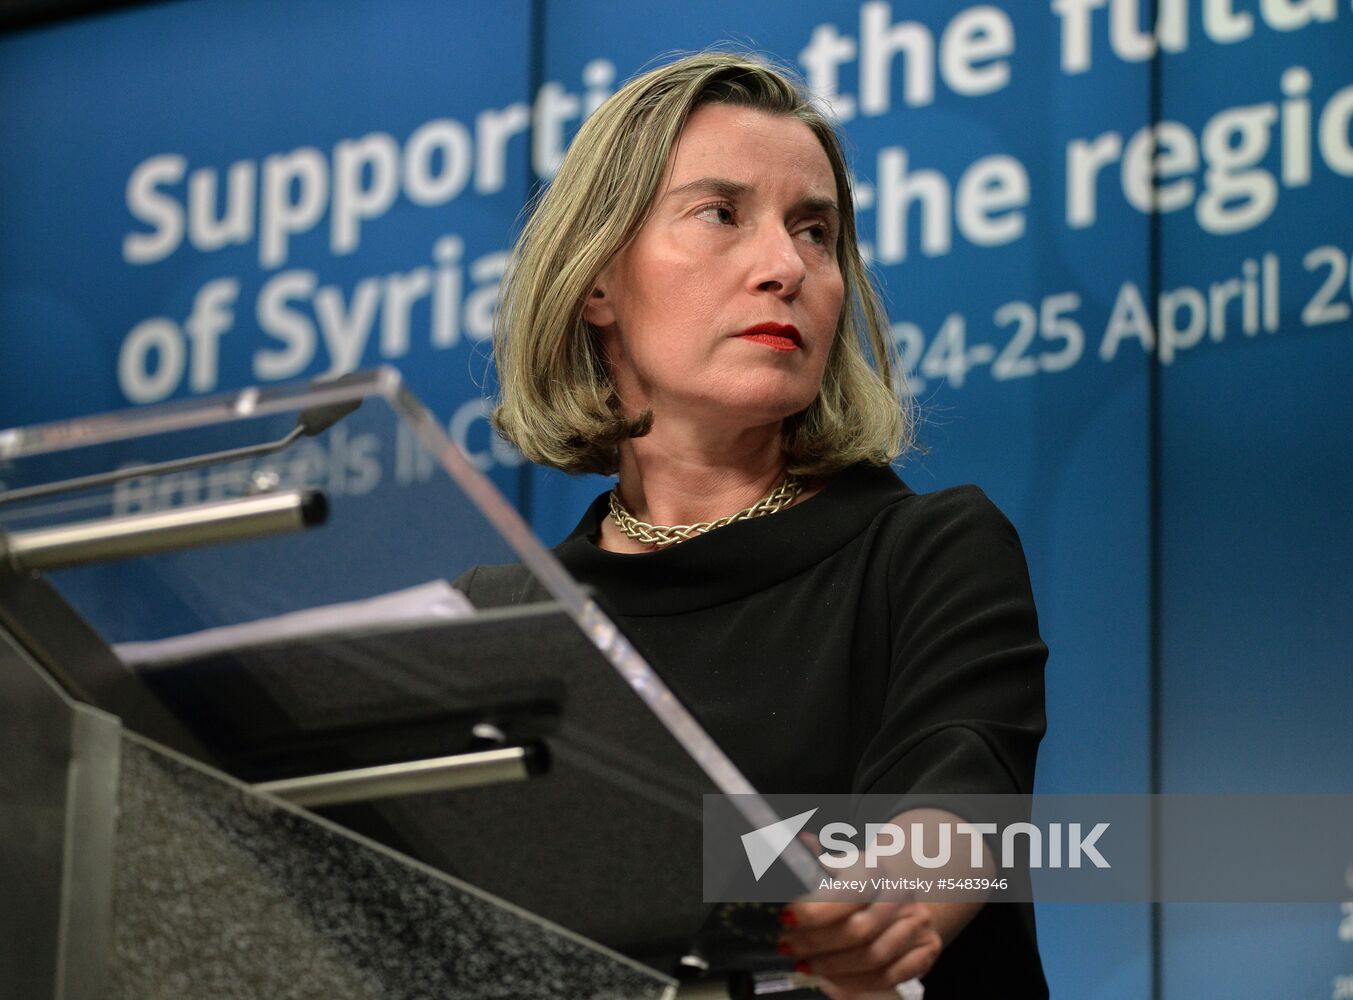 Supporting the Future of Syria and the Region conference in Brussels